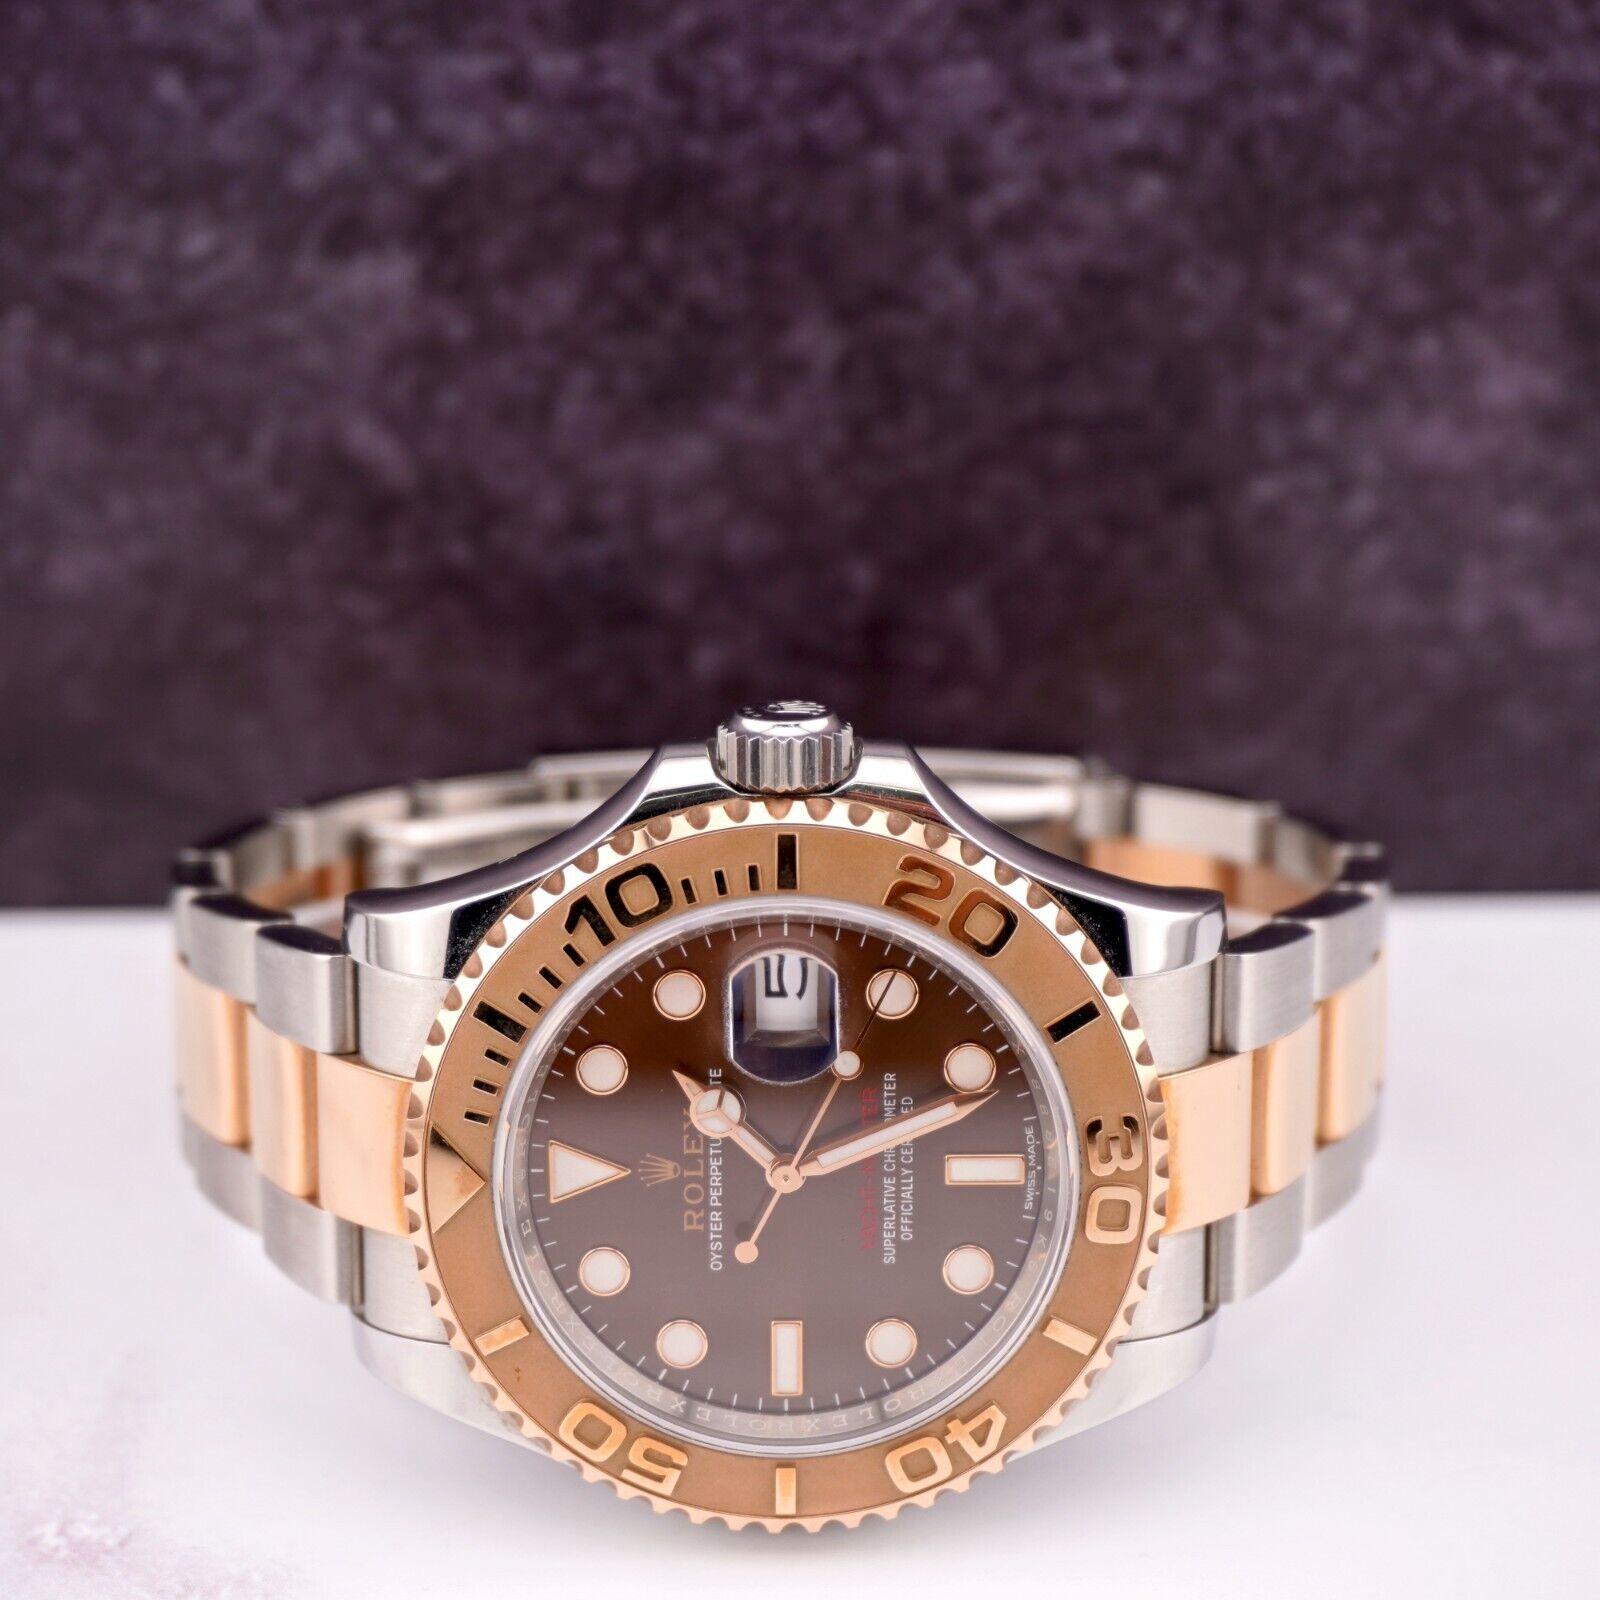 Rolex Yacht-Master Oyster Perpetual 40mm Watch

Pre-owned w/ Original Box & Card
100% Authentic Authenticity Card
Condition - (Excellent Condition) - See Pics
Watch Reference - 116621
Model - Yacht-Master
Dial Color - Brown
Material - 18k Rose